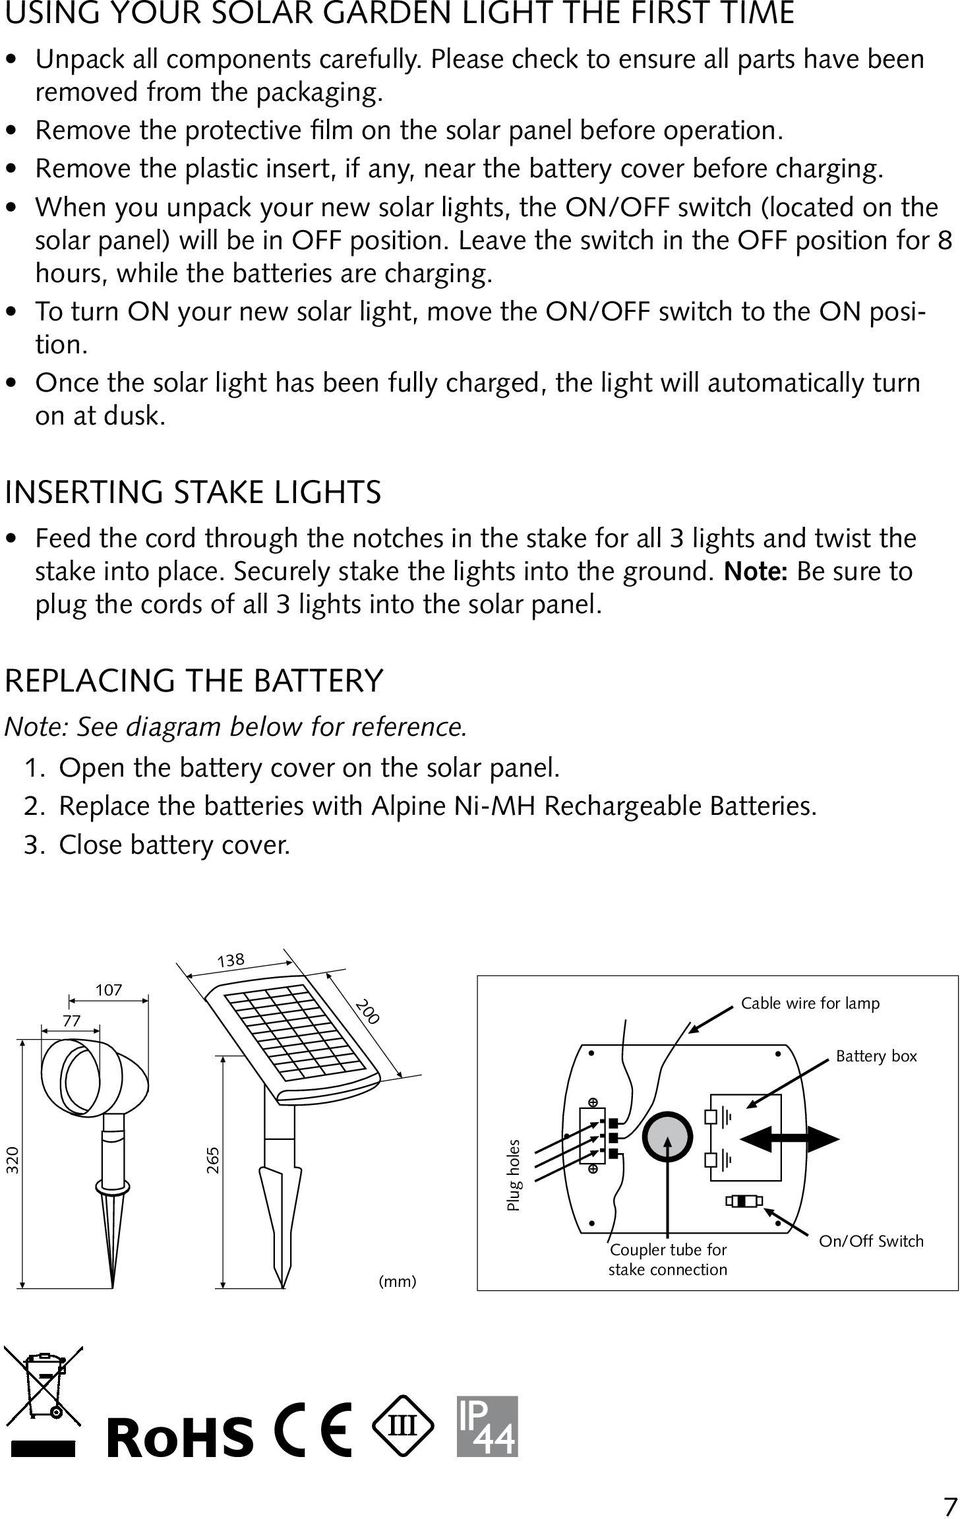 When you unpack your new solar lights, the ON/OFF switch (located on the solar panel) will be in OFF position. Leave the switch in the OFF position for 8 hours, while the batteries are charging.